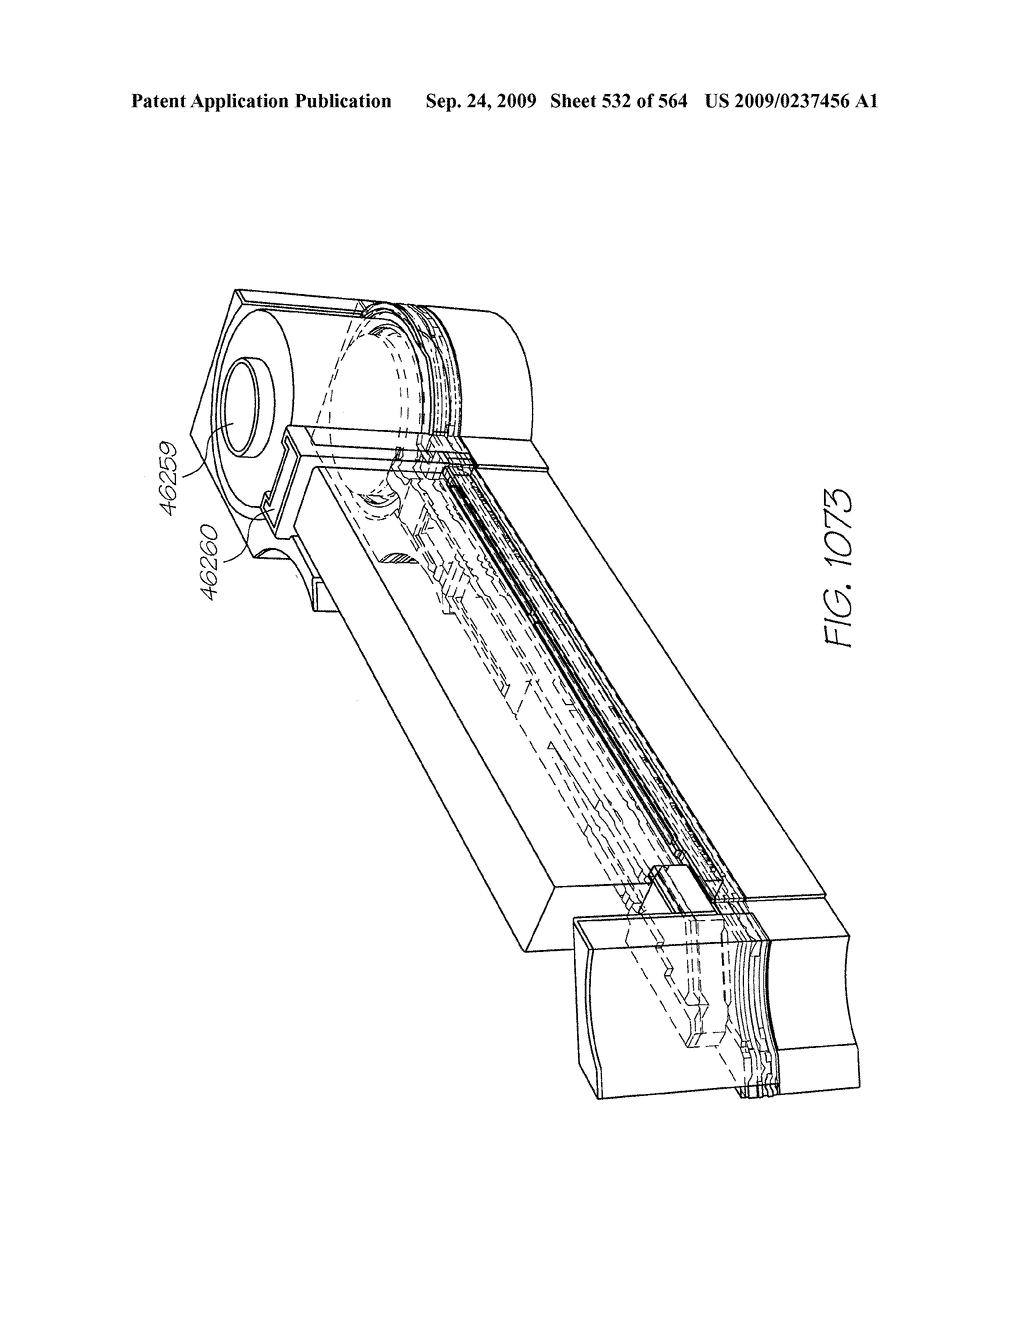 Inkjet Printhead With Paddle For Ejecting Ink From One Of Two Nozzles - diagram, schematic, and image 533